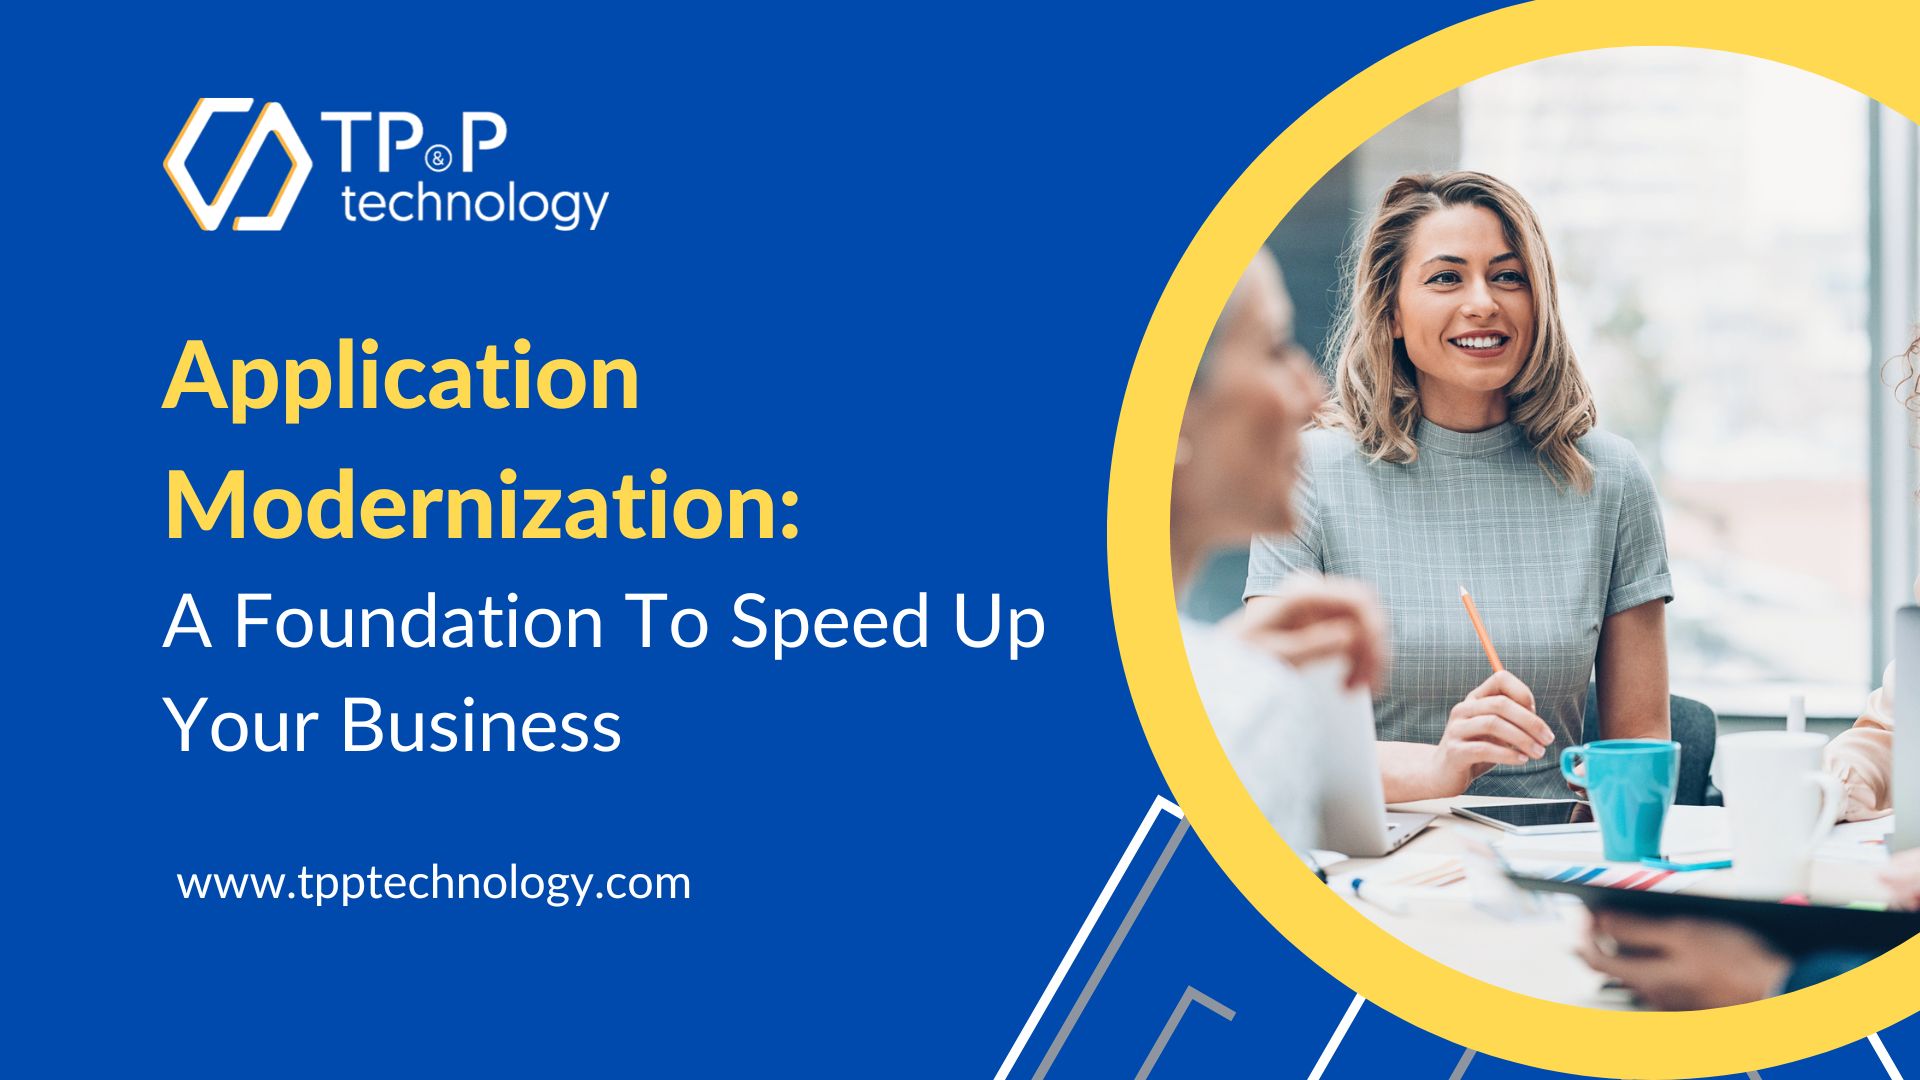 Application Modernization: A Foundation To Speed Up Your Business 